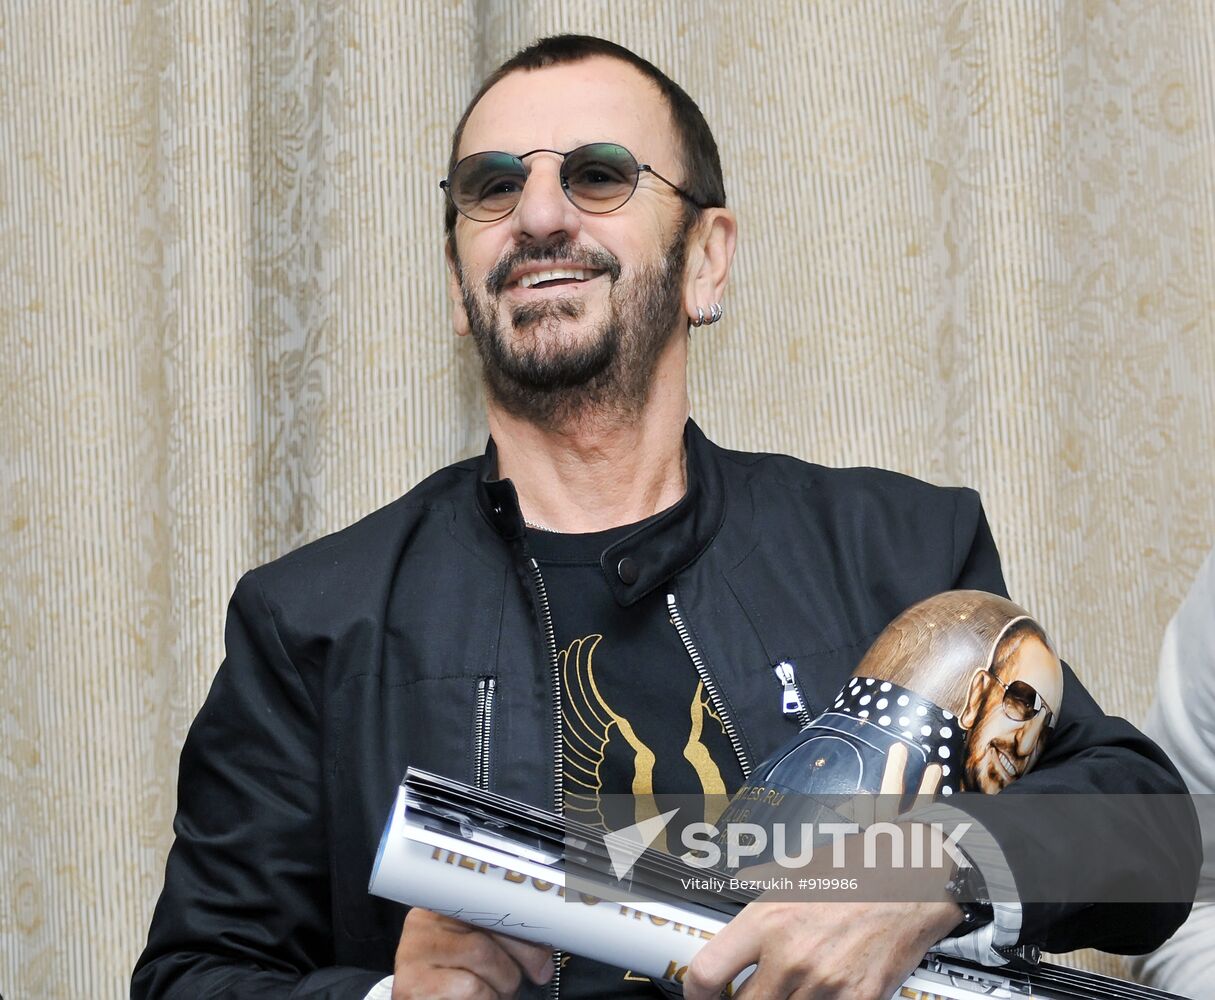 Ringo Starr gives news conference in Moscow